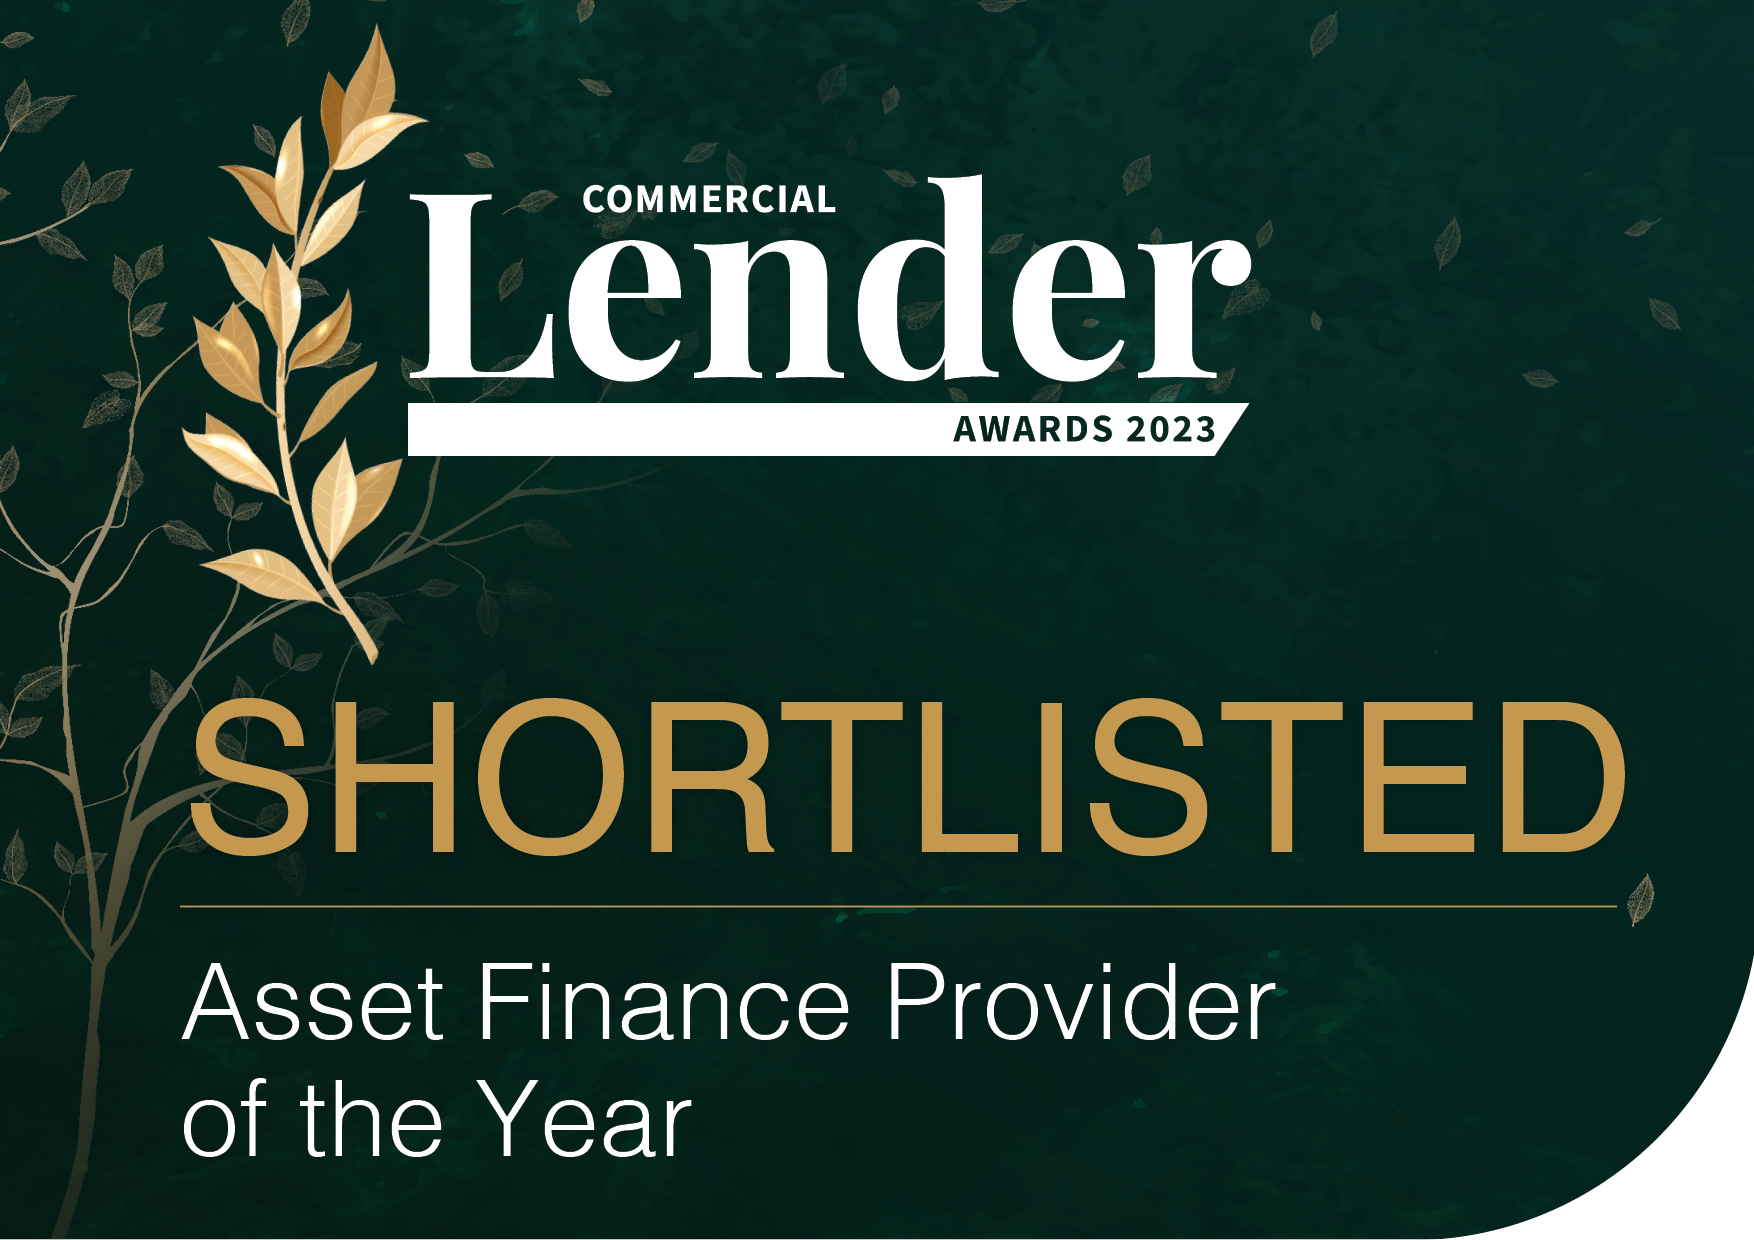 NACFB Commercial Lender Awards 2023 Shortlisted Asset Finance Provider of the Year